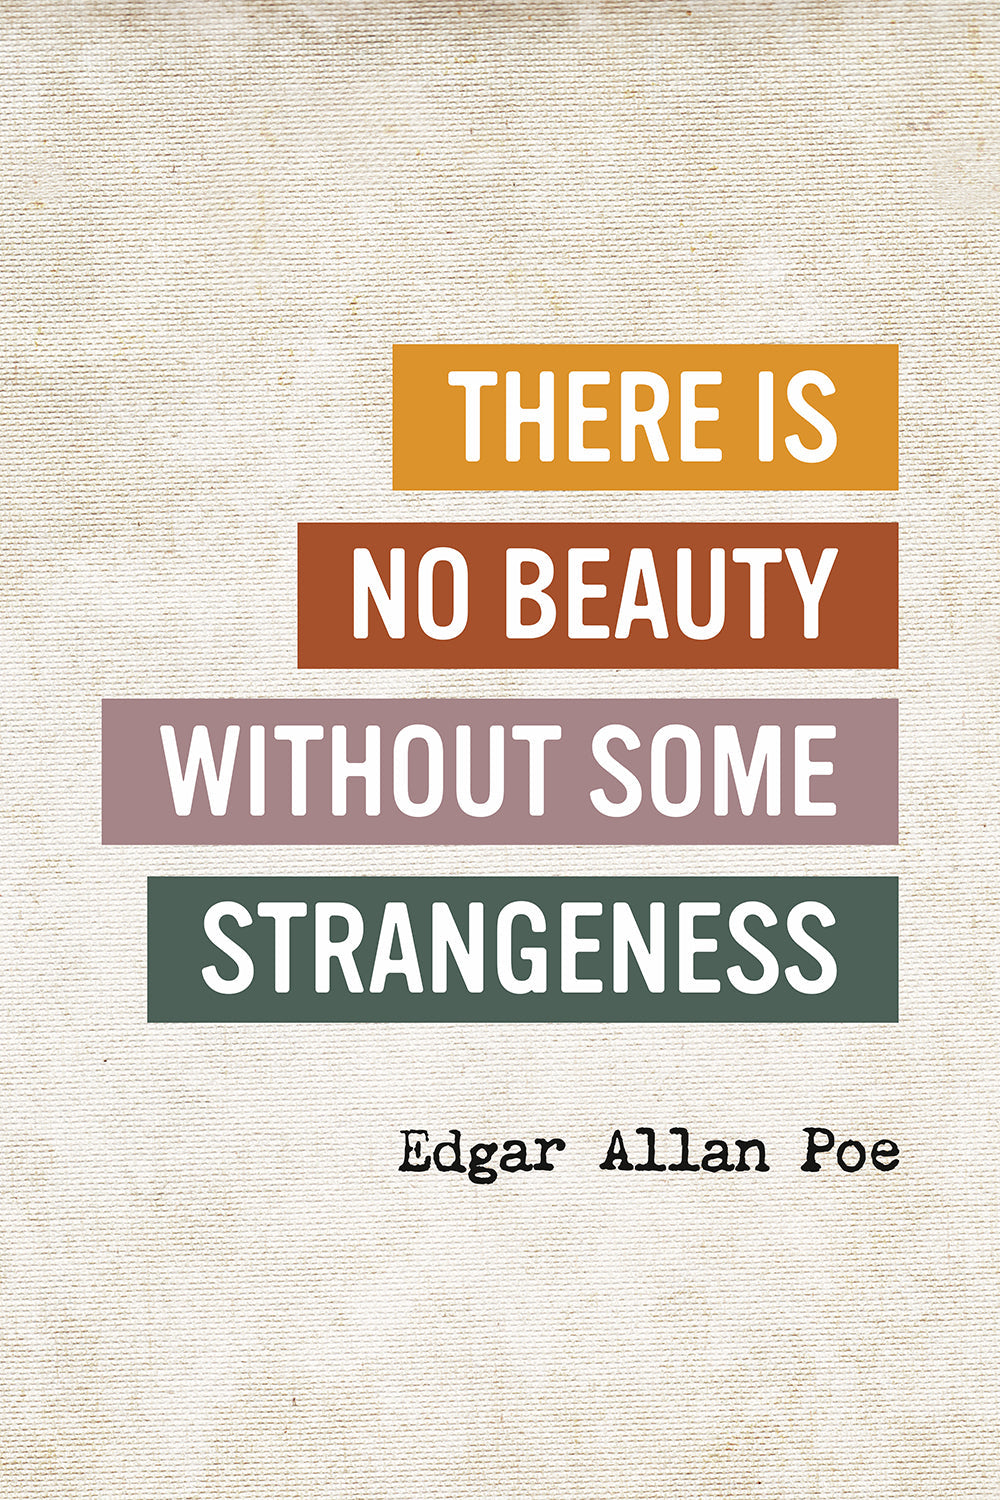 Edgar Allen Poe Quote - There is No Beauty without Some Strangeness Inspirational Art Print